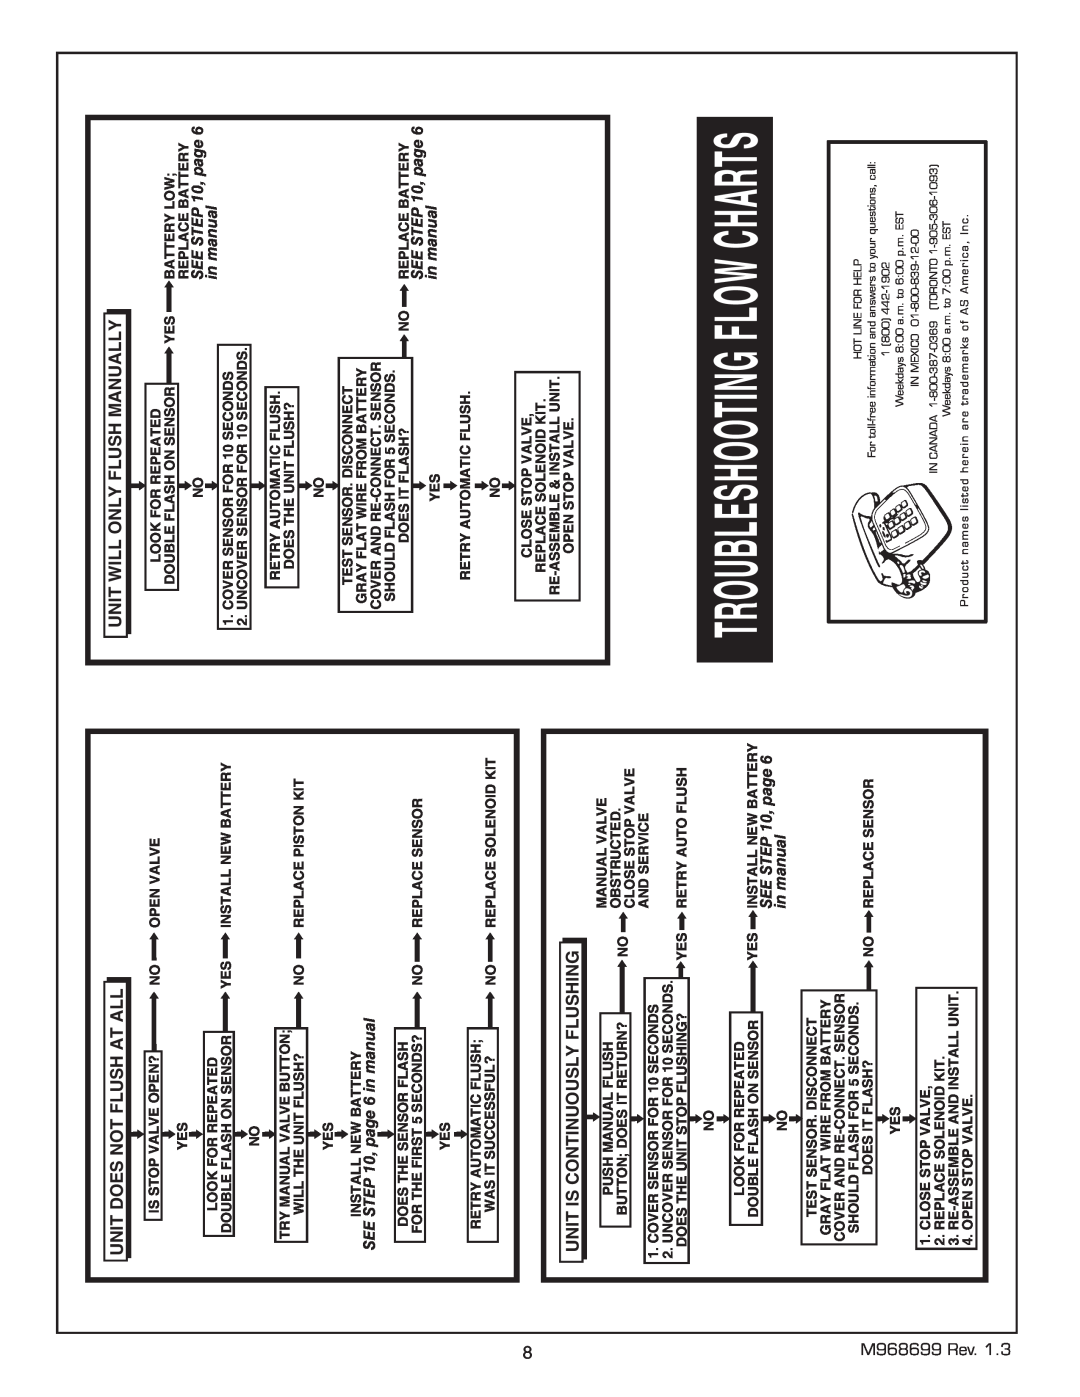 American Standard 6065.121, 065.525, 6065.161, 6065.565, 6065.122 Troubleshooting Flow Charts, SEE , page 6 in manual 